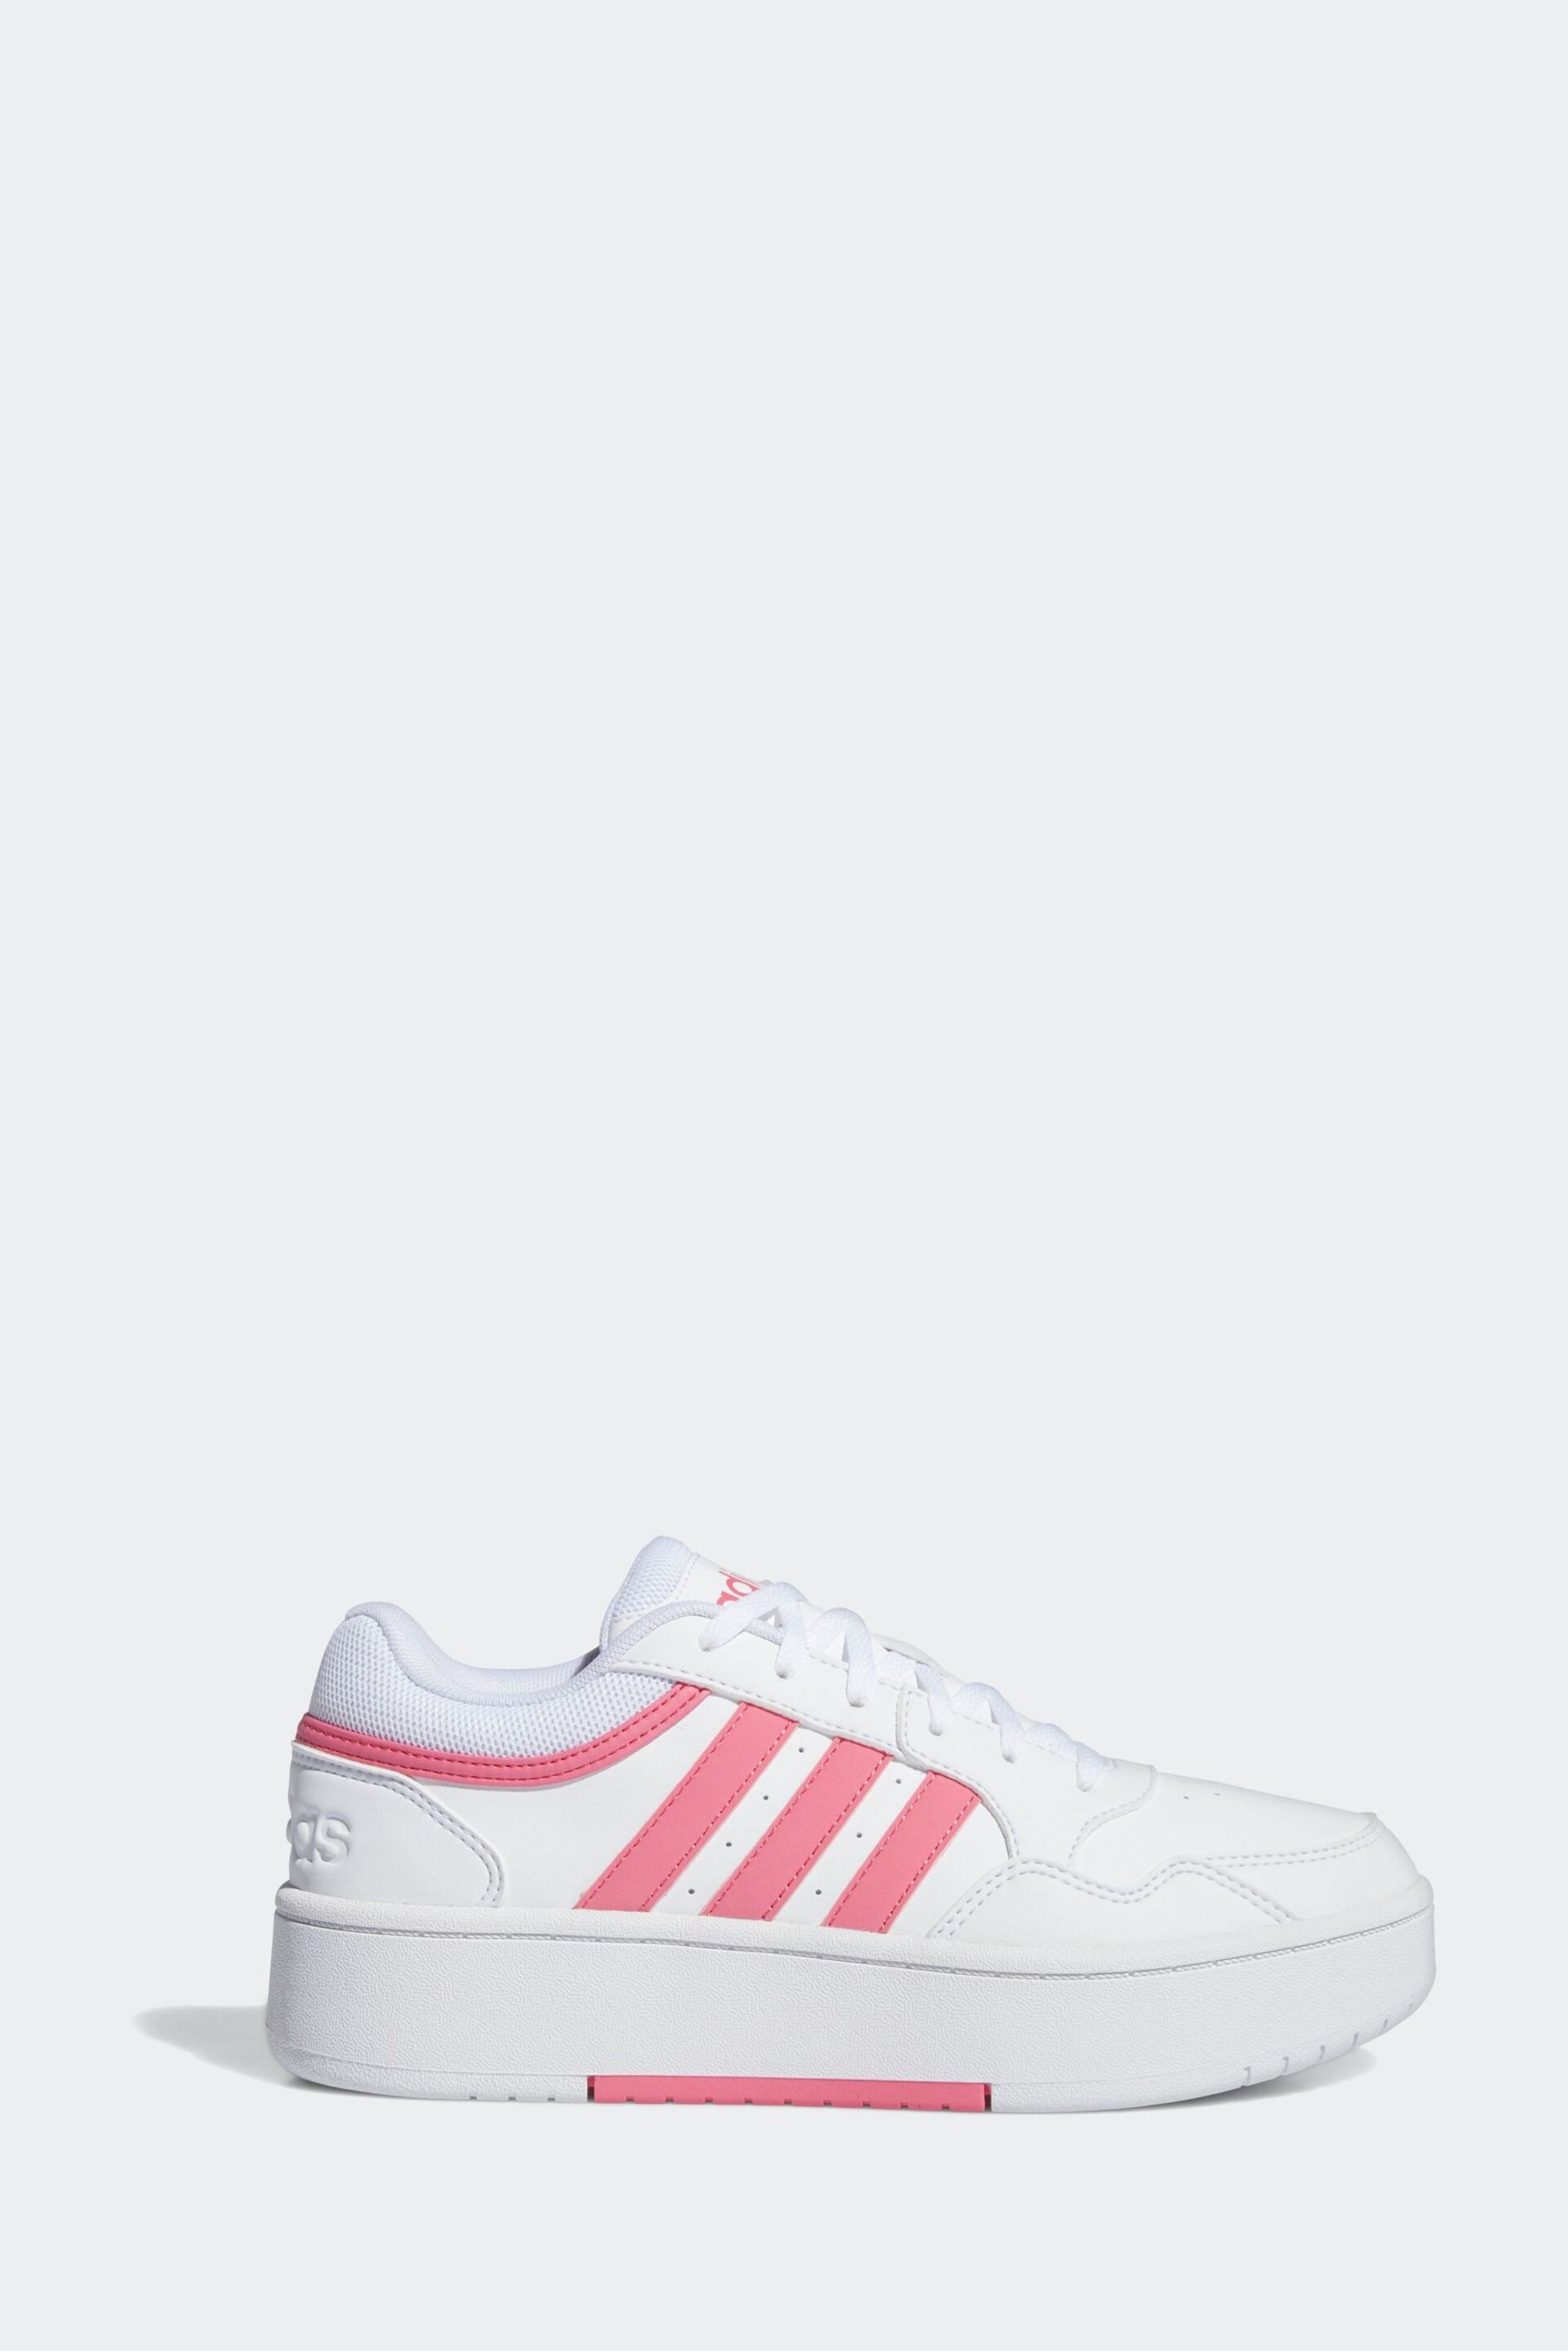 adidas Originals White/Pink Hoops 3.0 Bold Trainers - Image 9 of 9